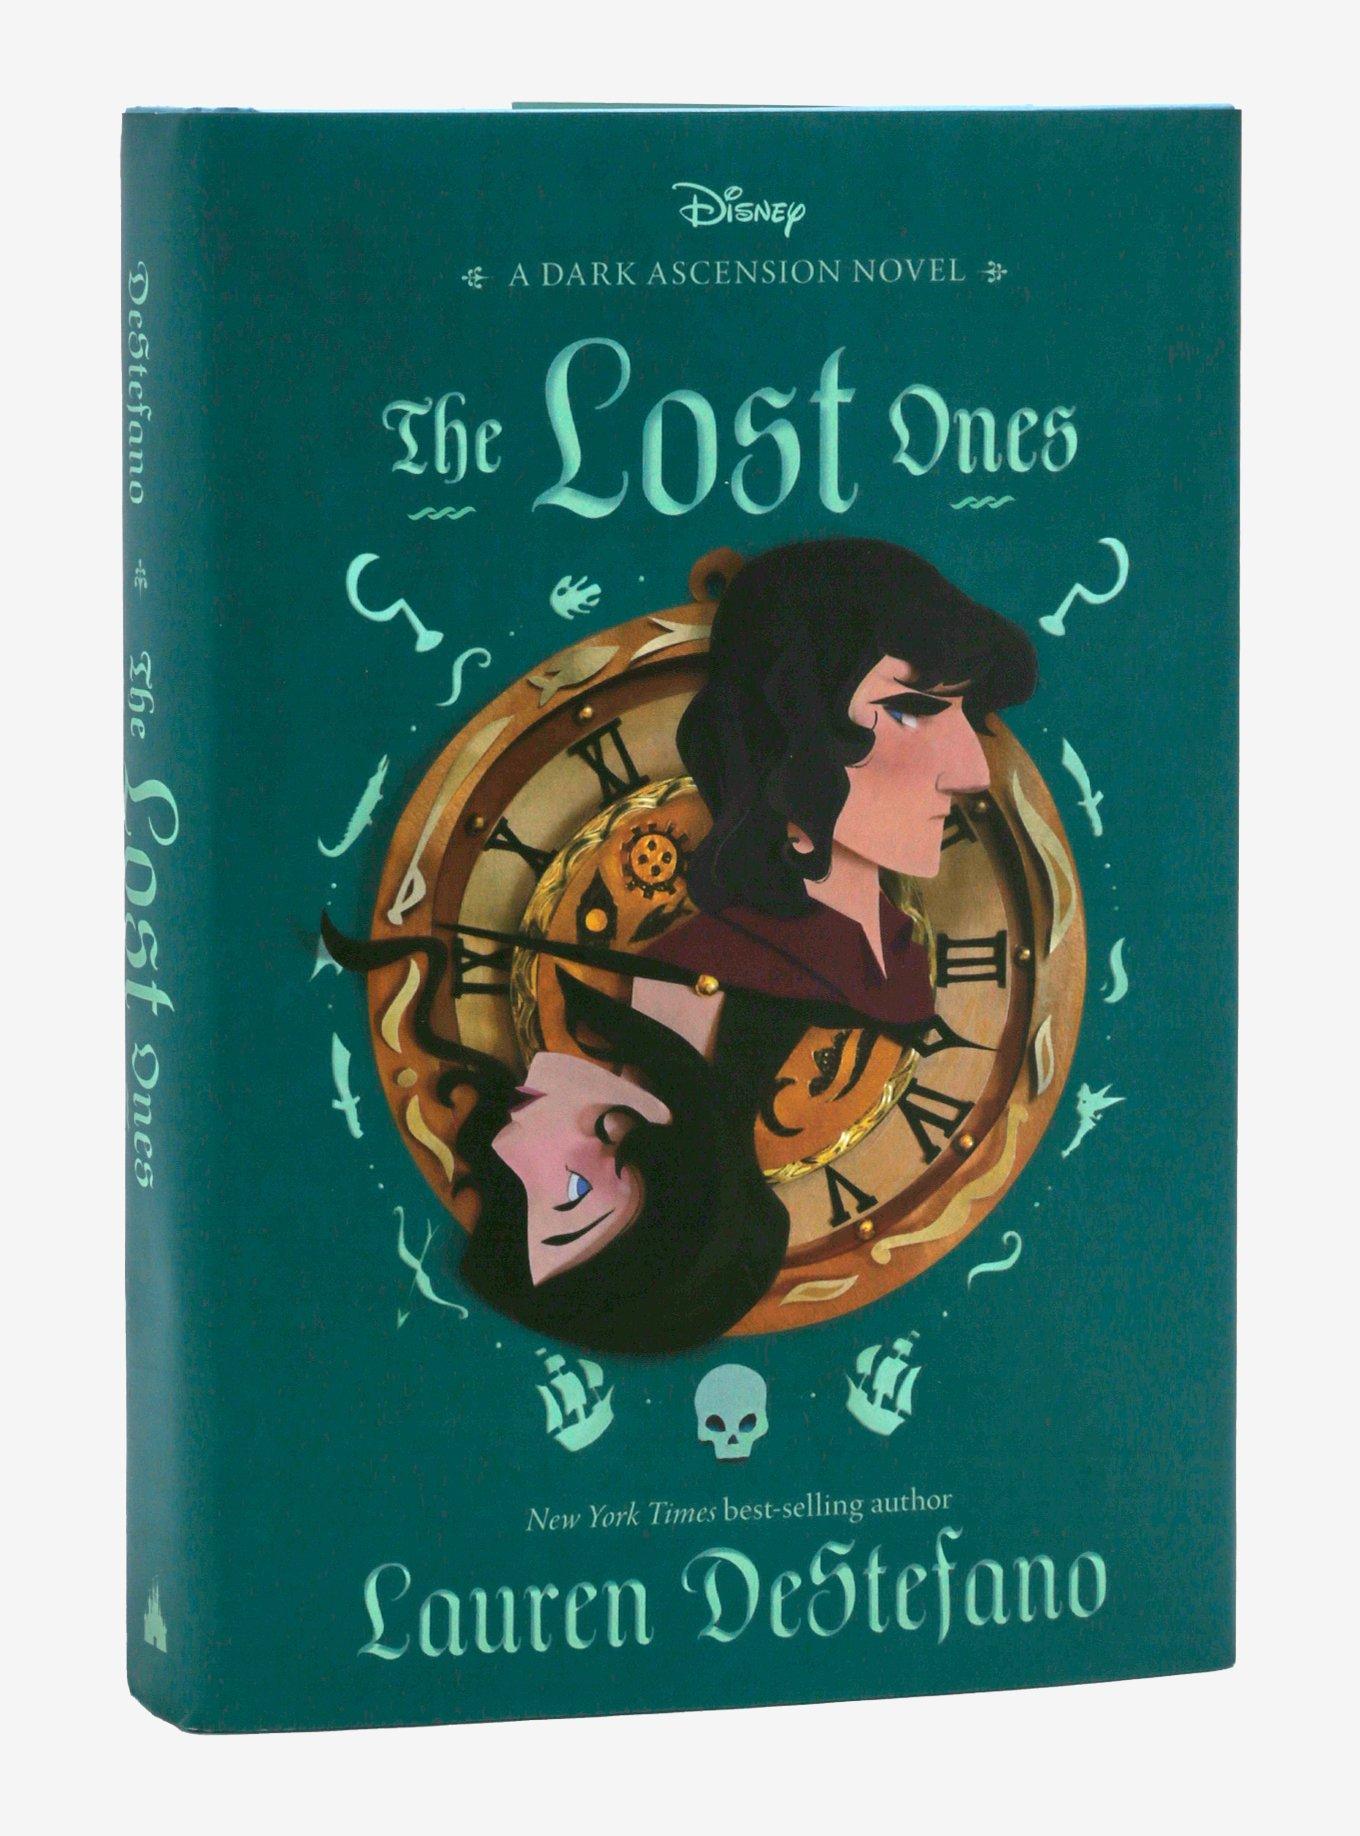 Disney The Dark Ascension Series: The Lost Ones Book